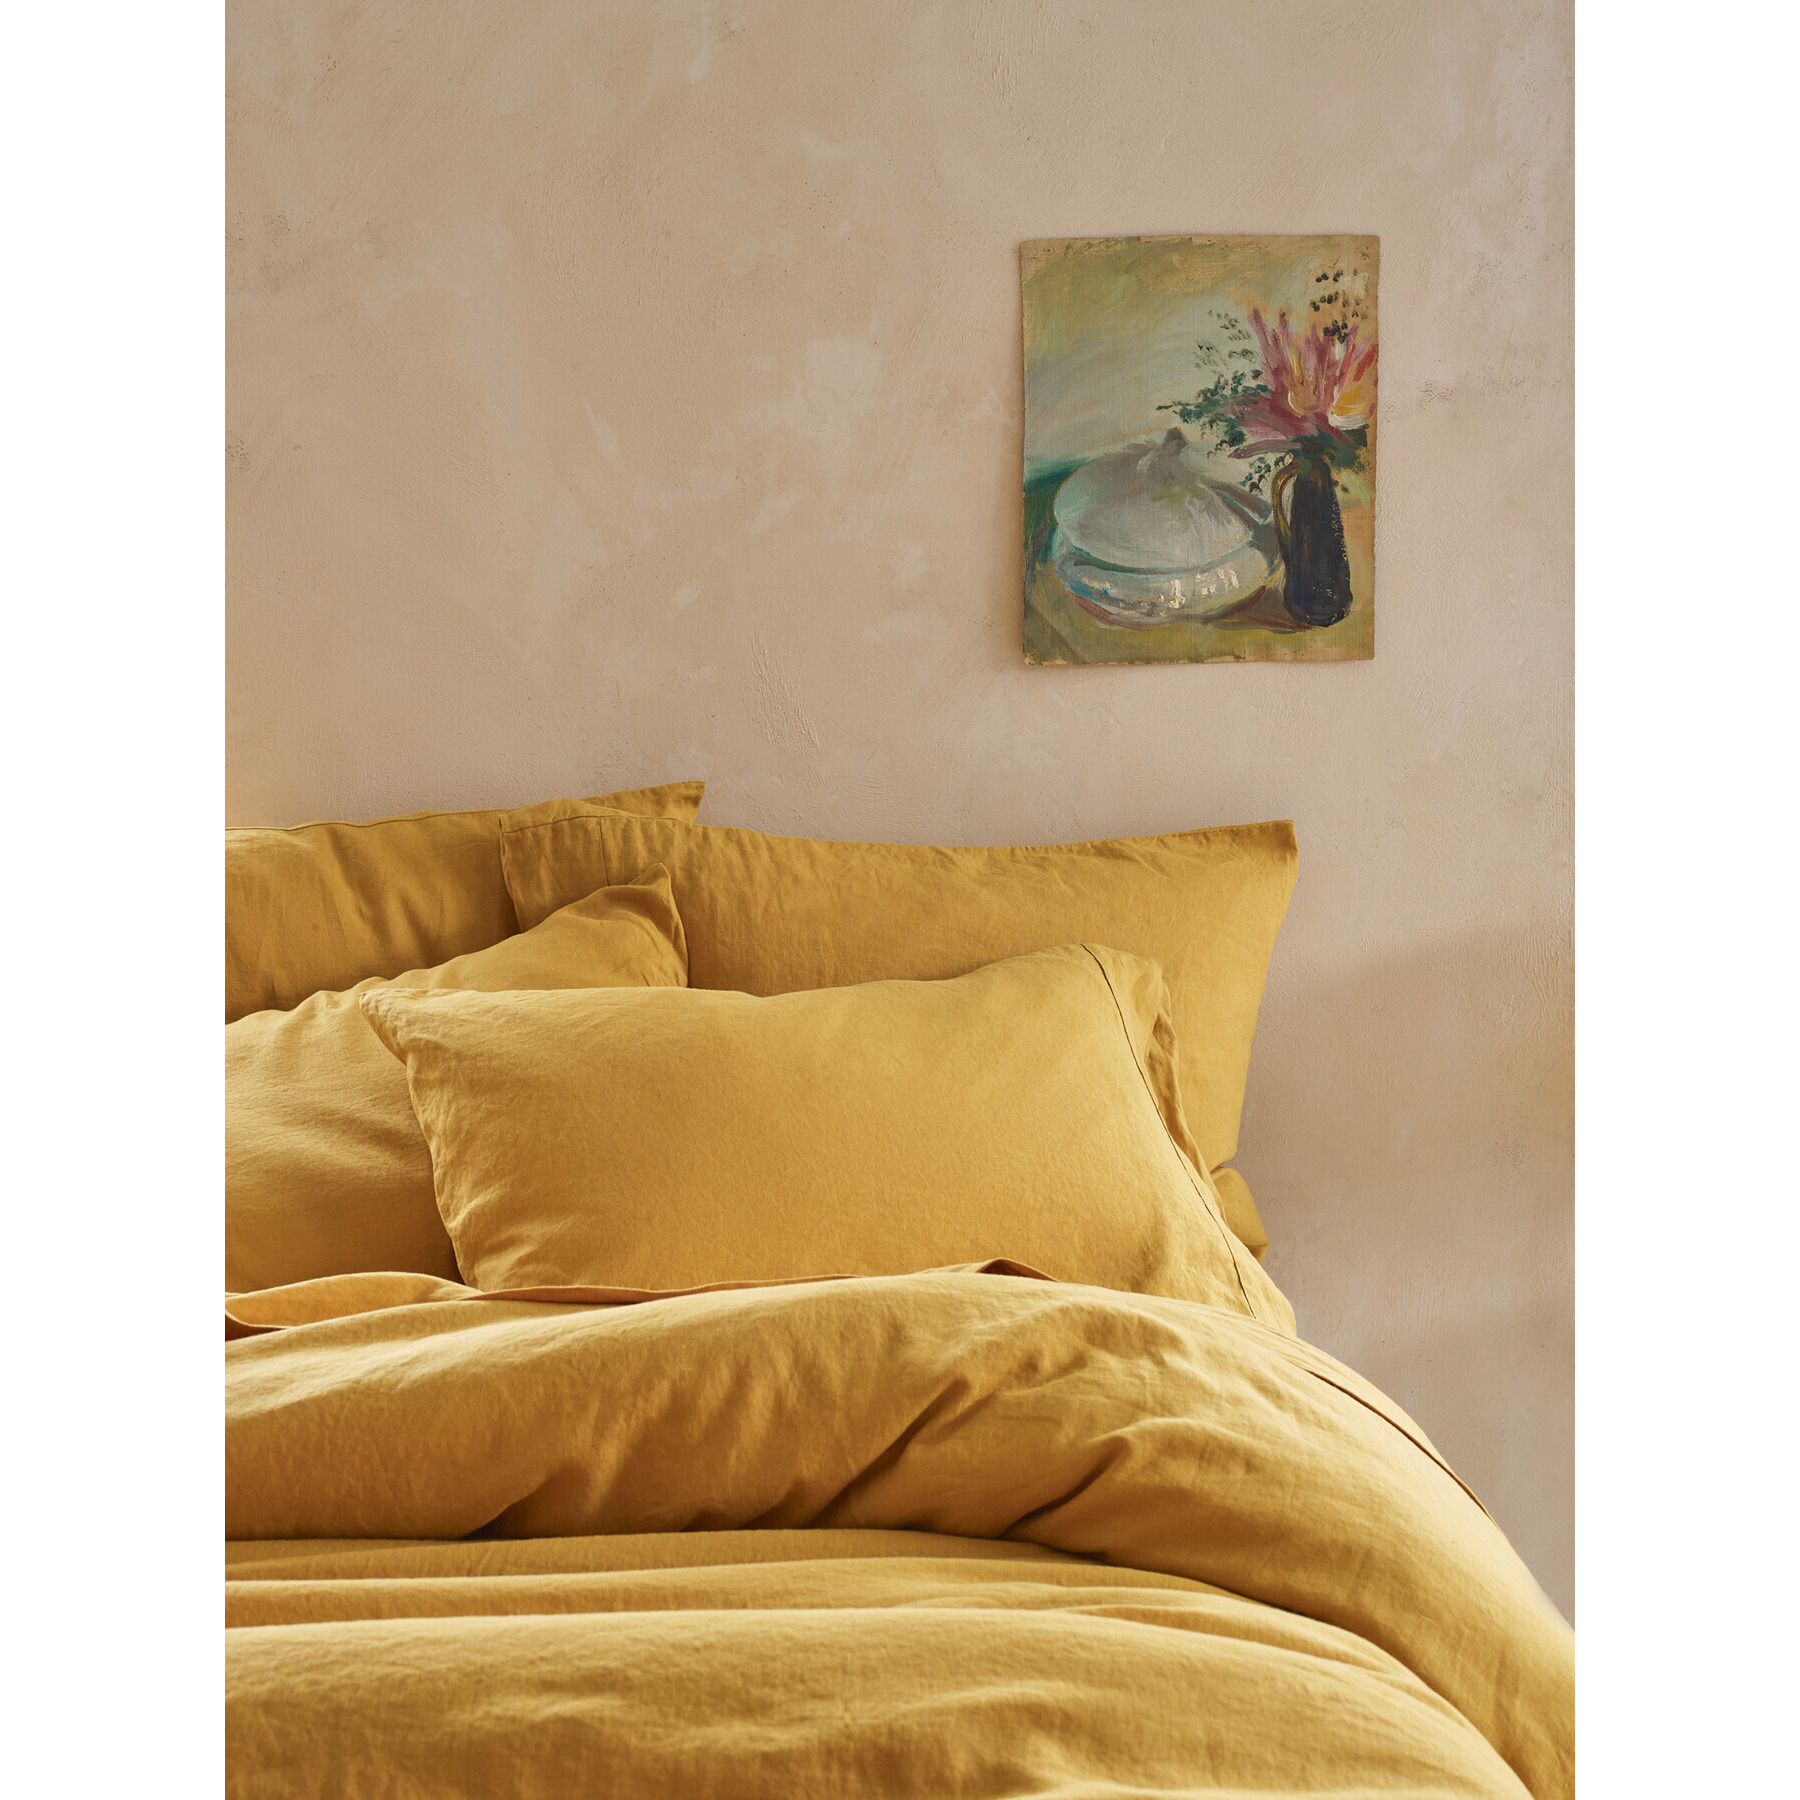 Piglet in Bed Linen Fitted Sheet - Size Single Yellow - image 1